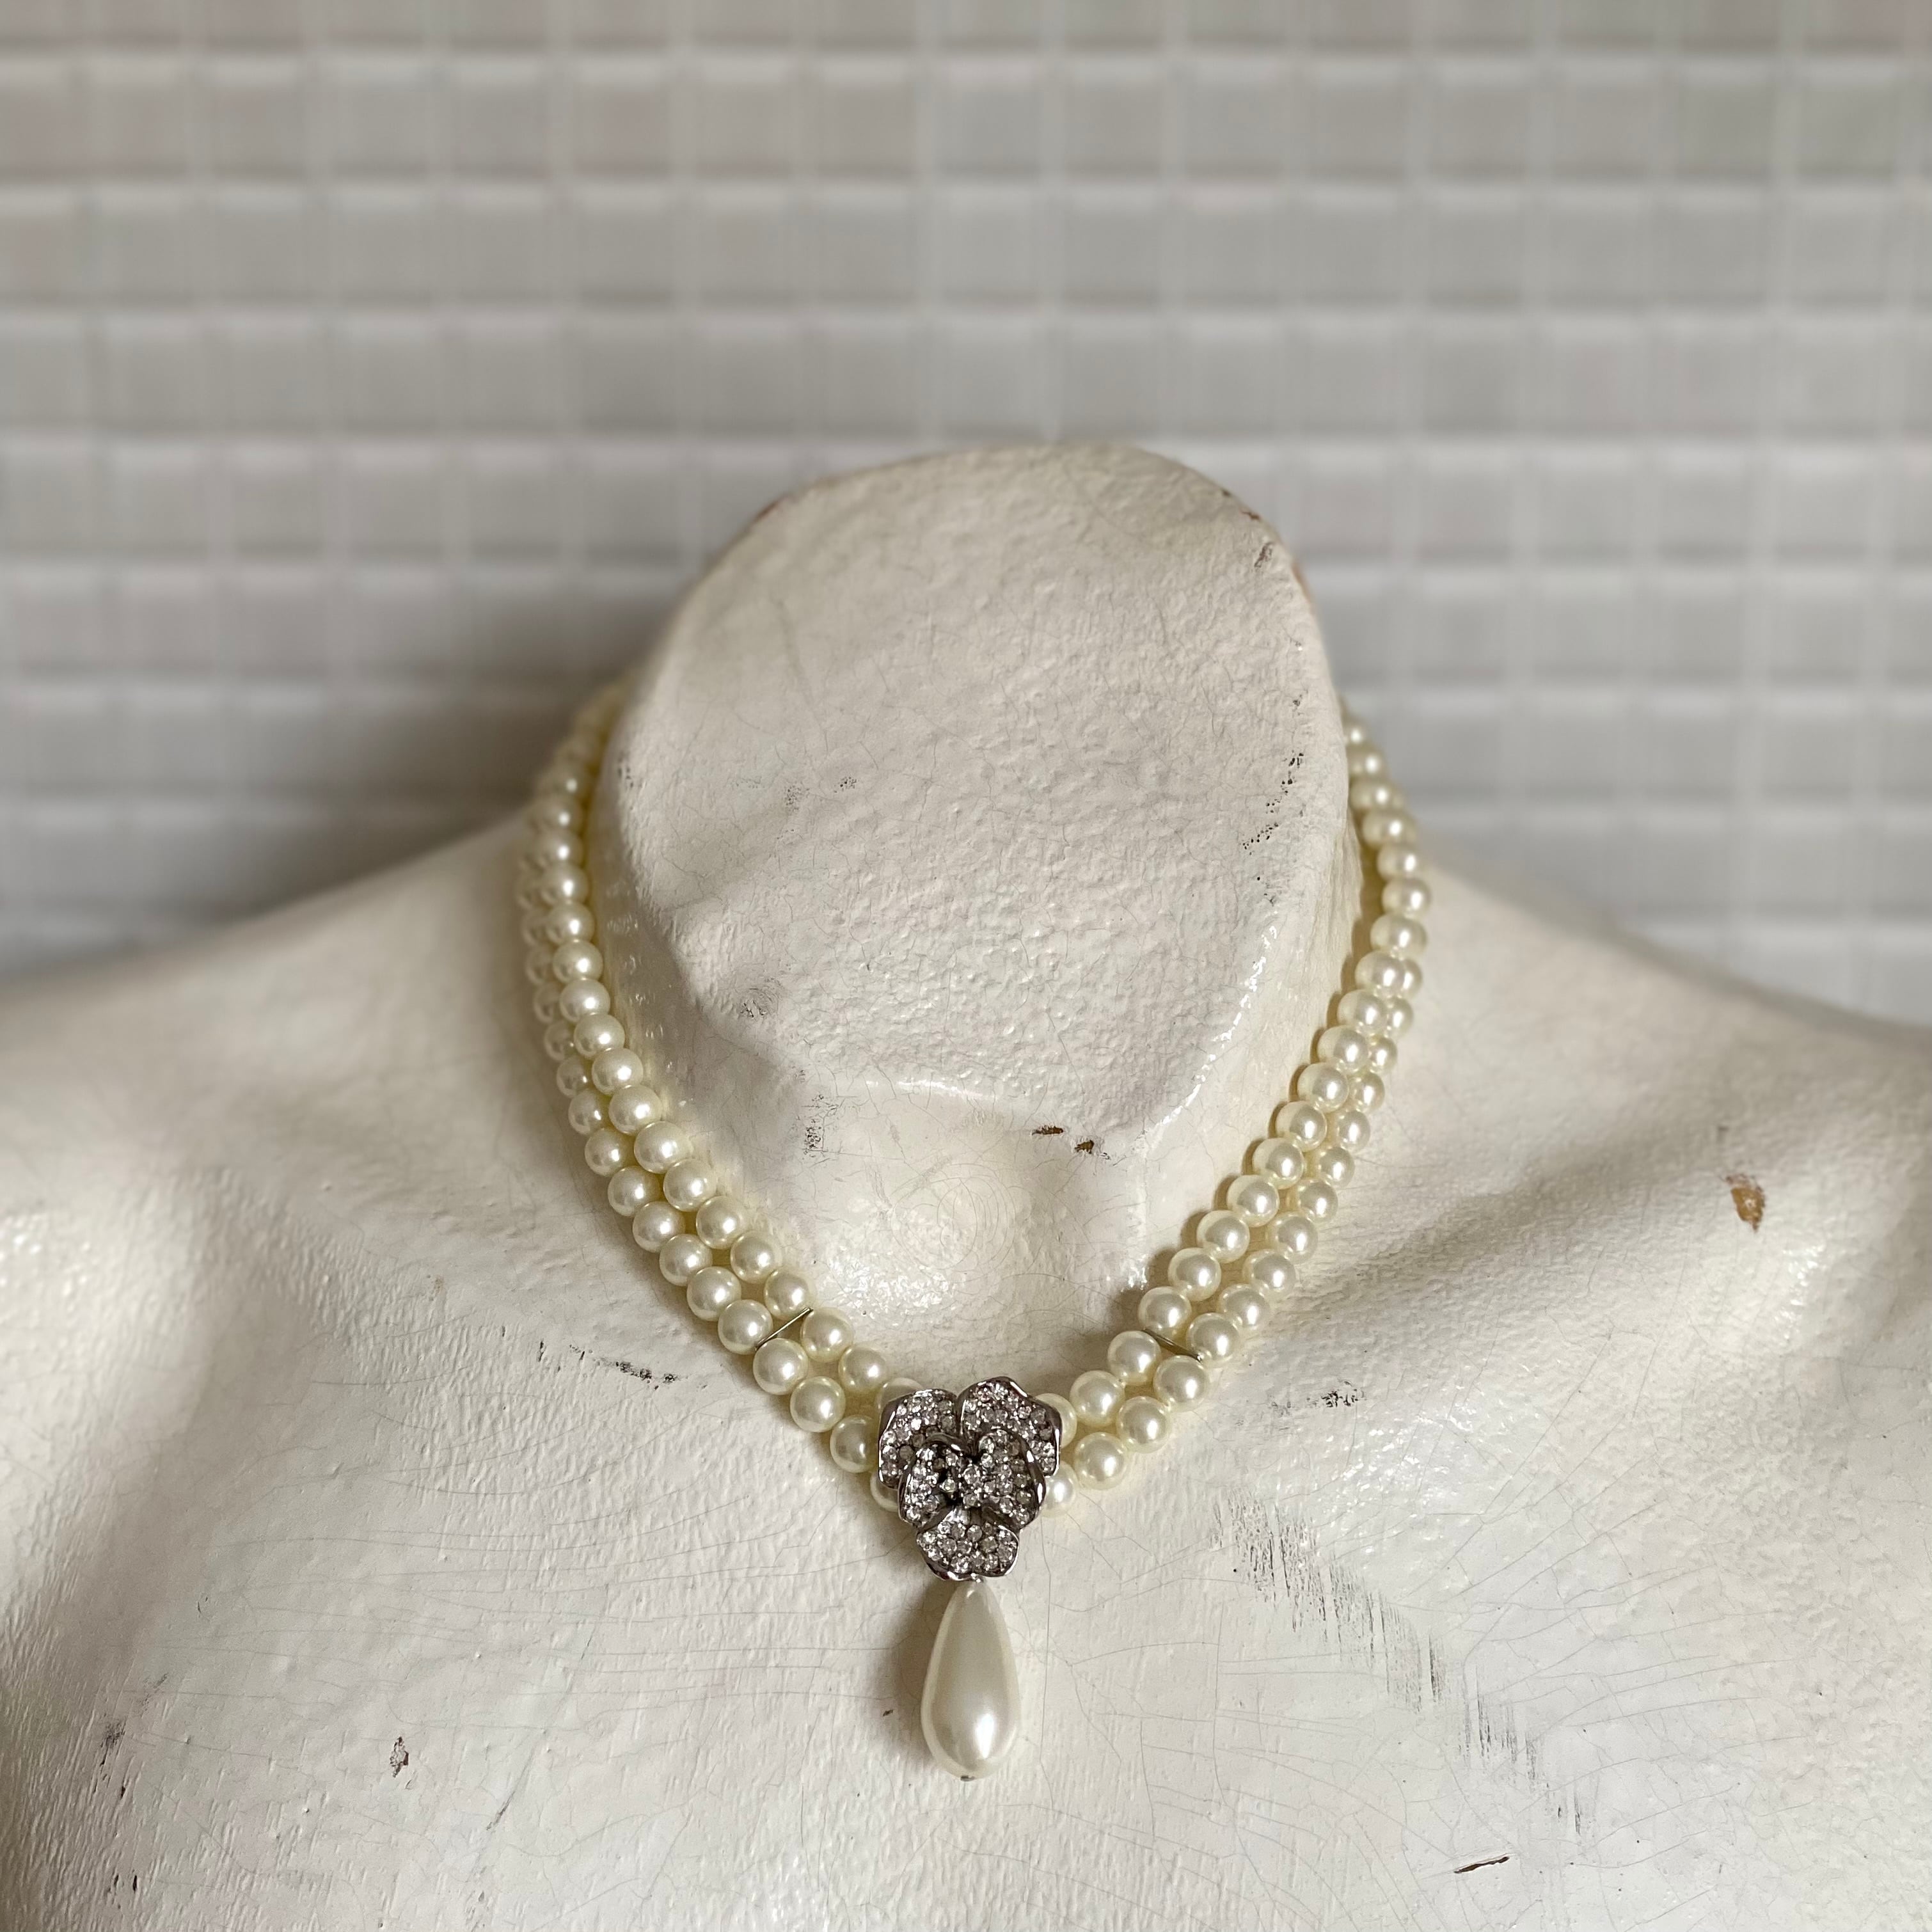 Used retro flower bijou pearl necklace レトロ ヴィンテージ ...